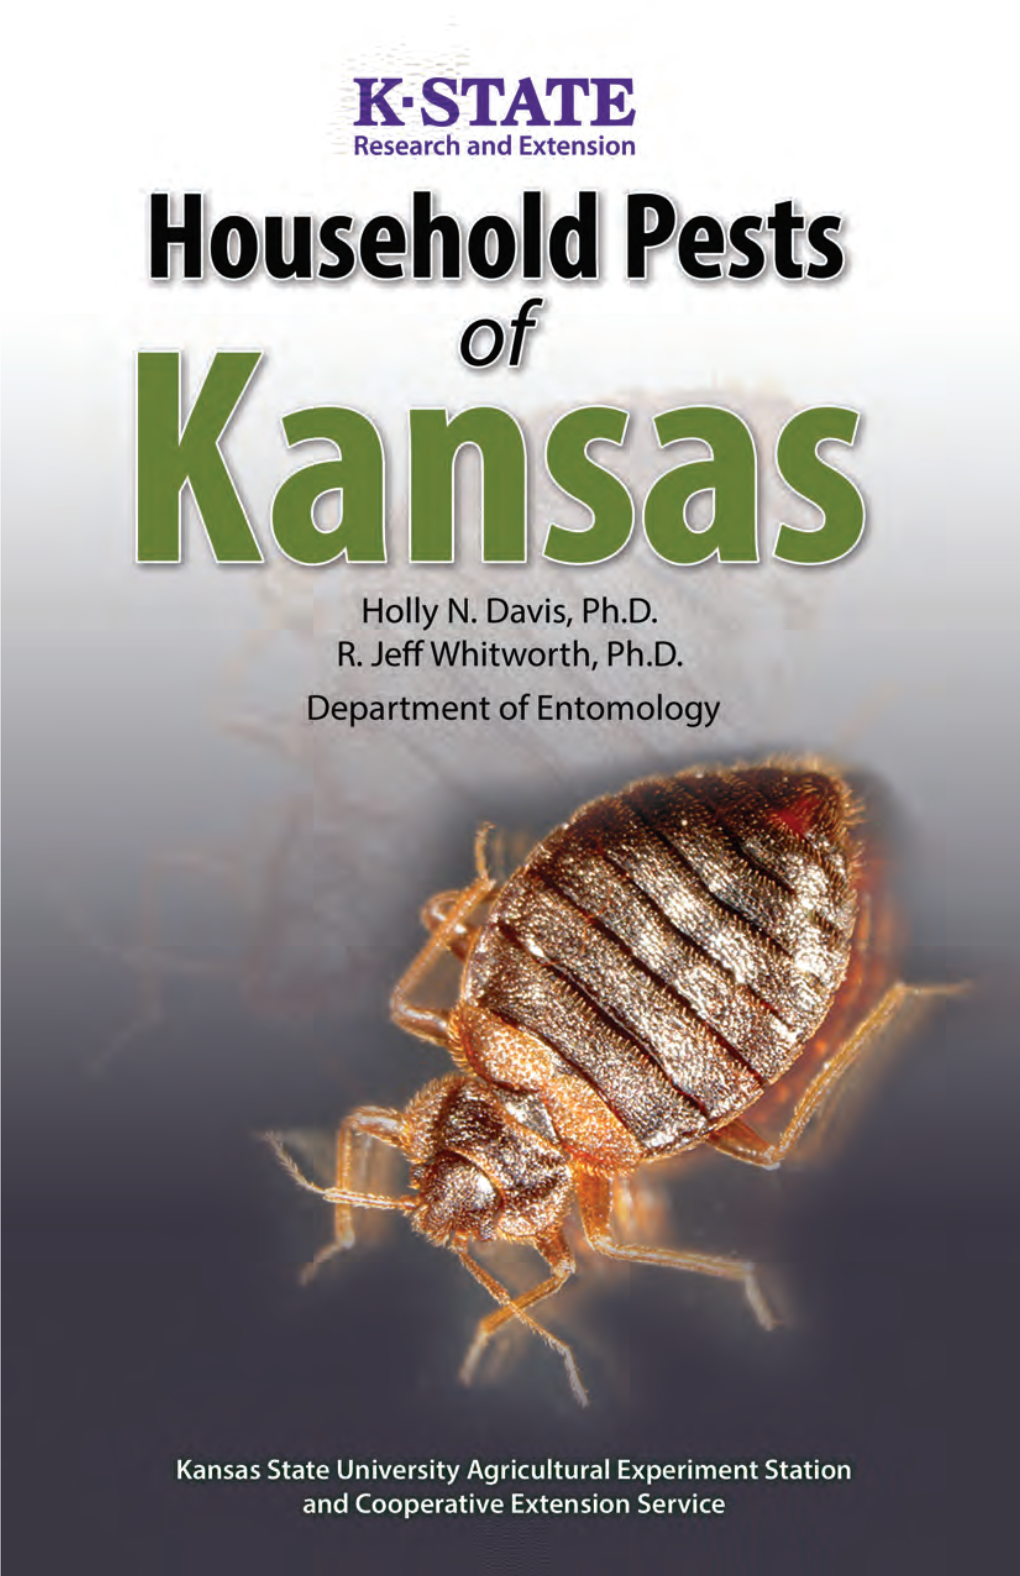 Household Pests of Kansas Is a Valuable Reference for All Kansas Residents